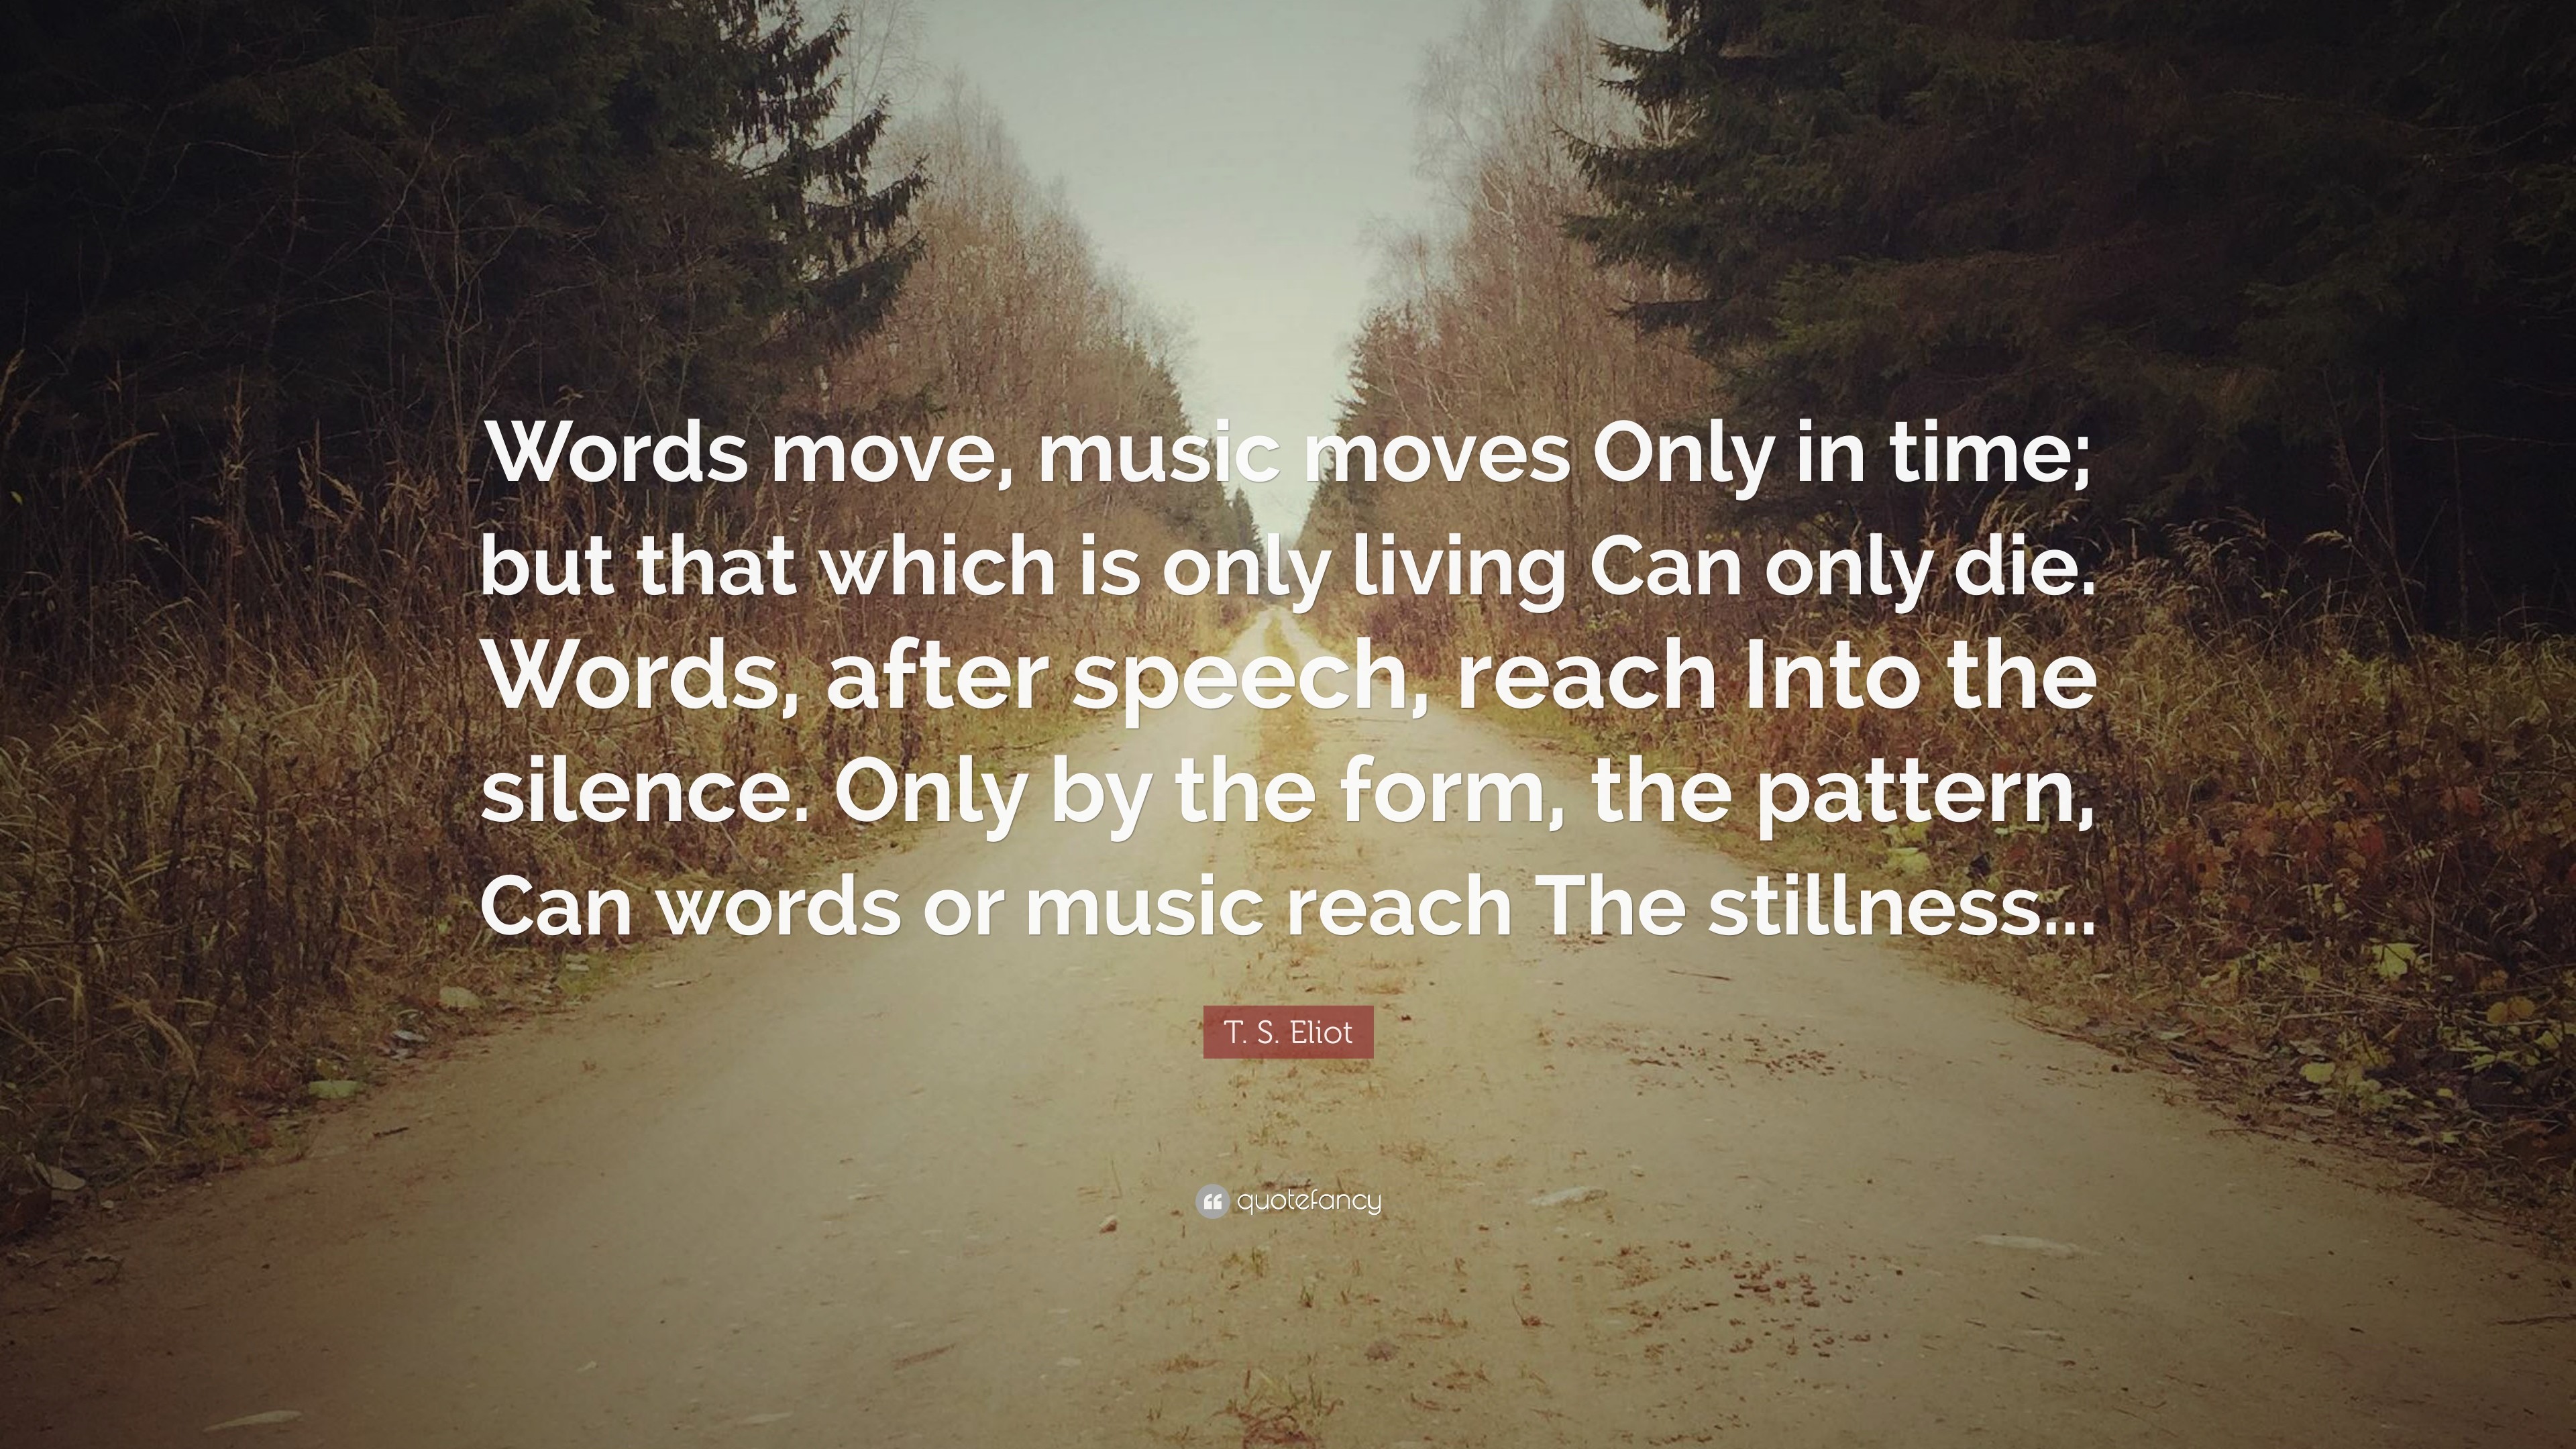 3840x2160 T. S. Eliot Quote: “Words move, music moves Only in time; but that